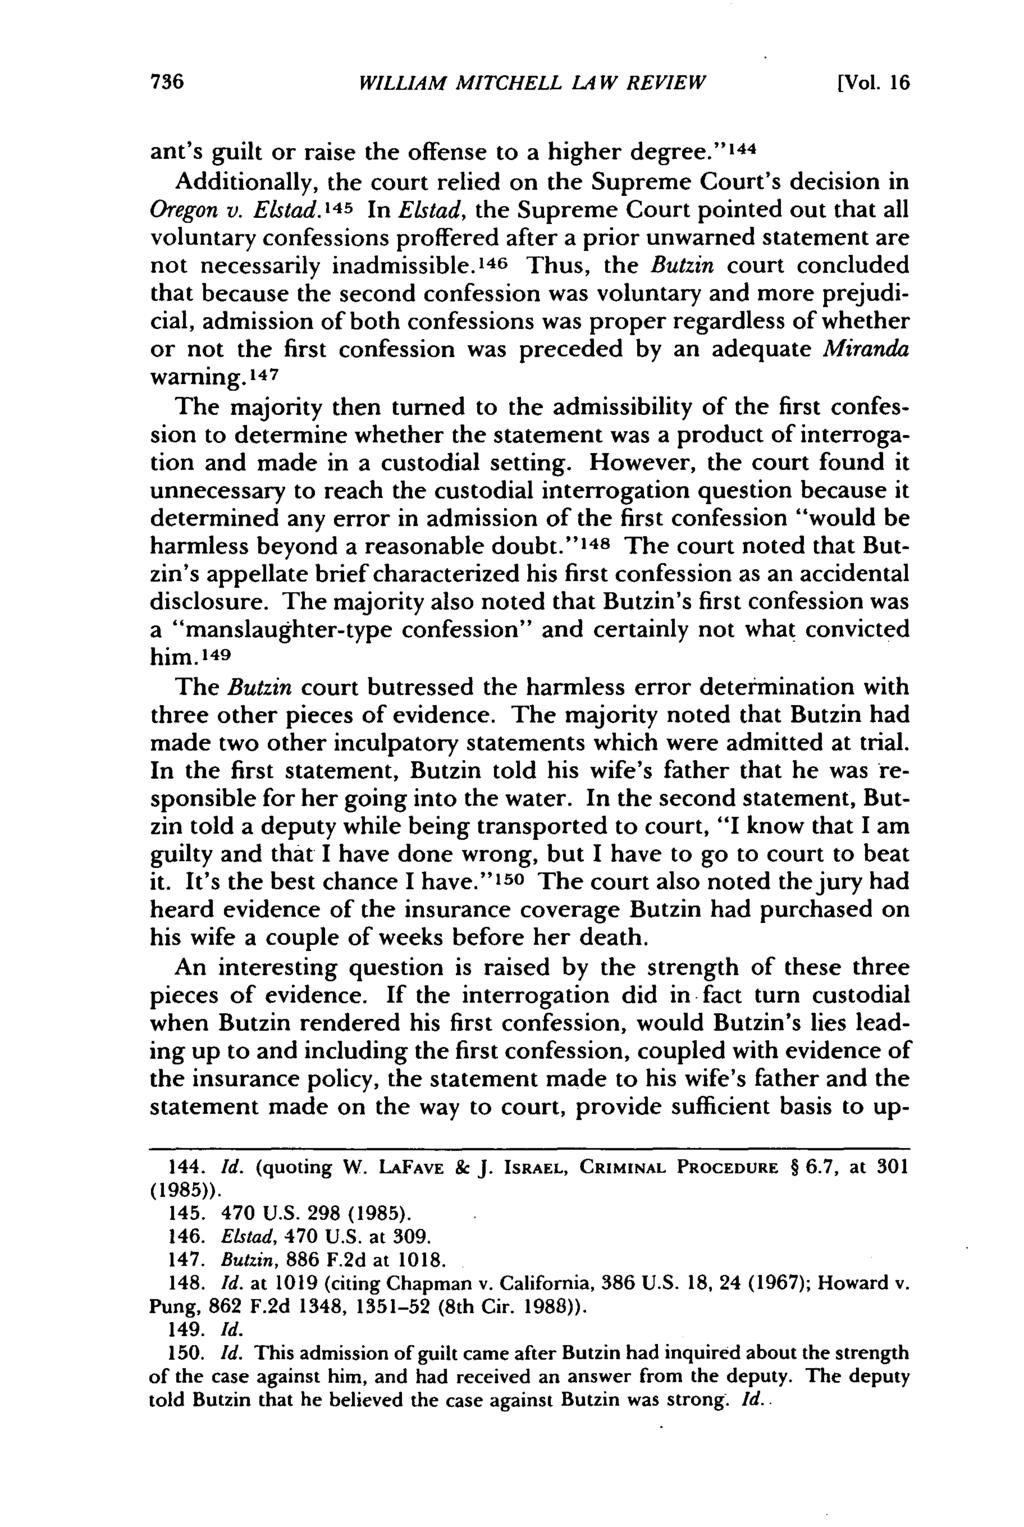 William Mitchell Law Review, Vol. 16, Iss. 3 [1990], Art. 7 WILLIAM MITCHELL LA W REVIEW [Vol. 16 ant's guilt or raise the offense to a higher degree.